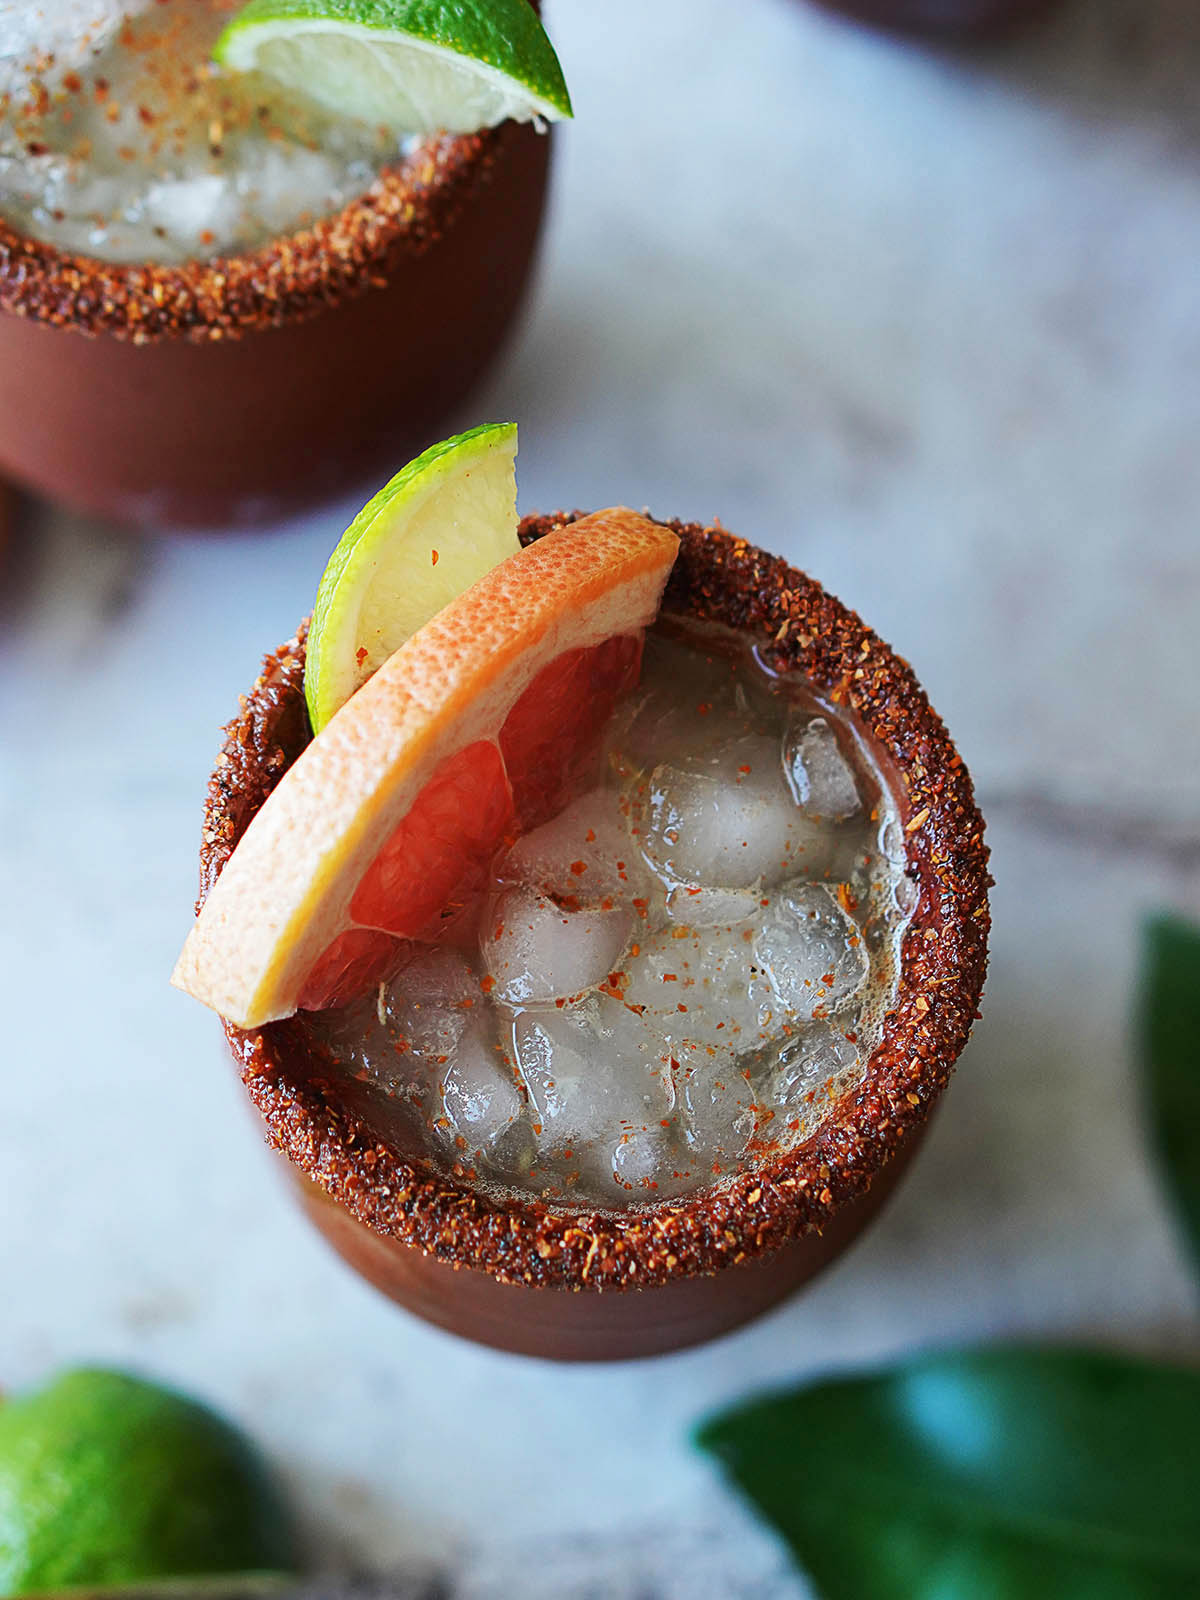 A Cantarito cup with a cocktail garnished with a slice of grapefruit.